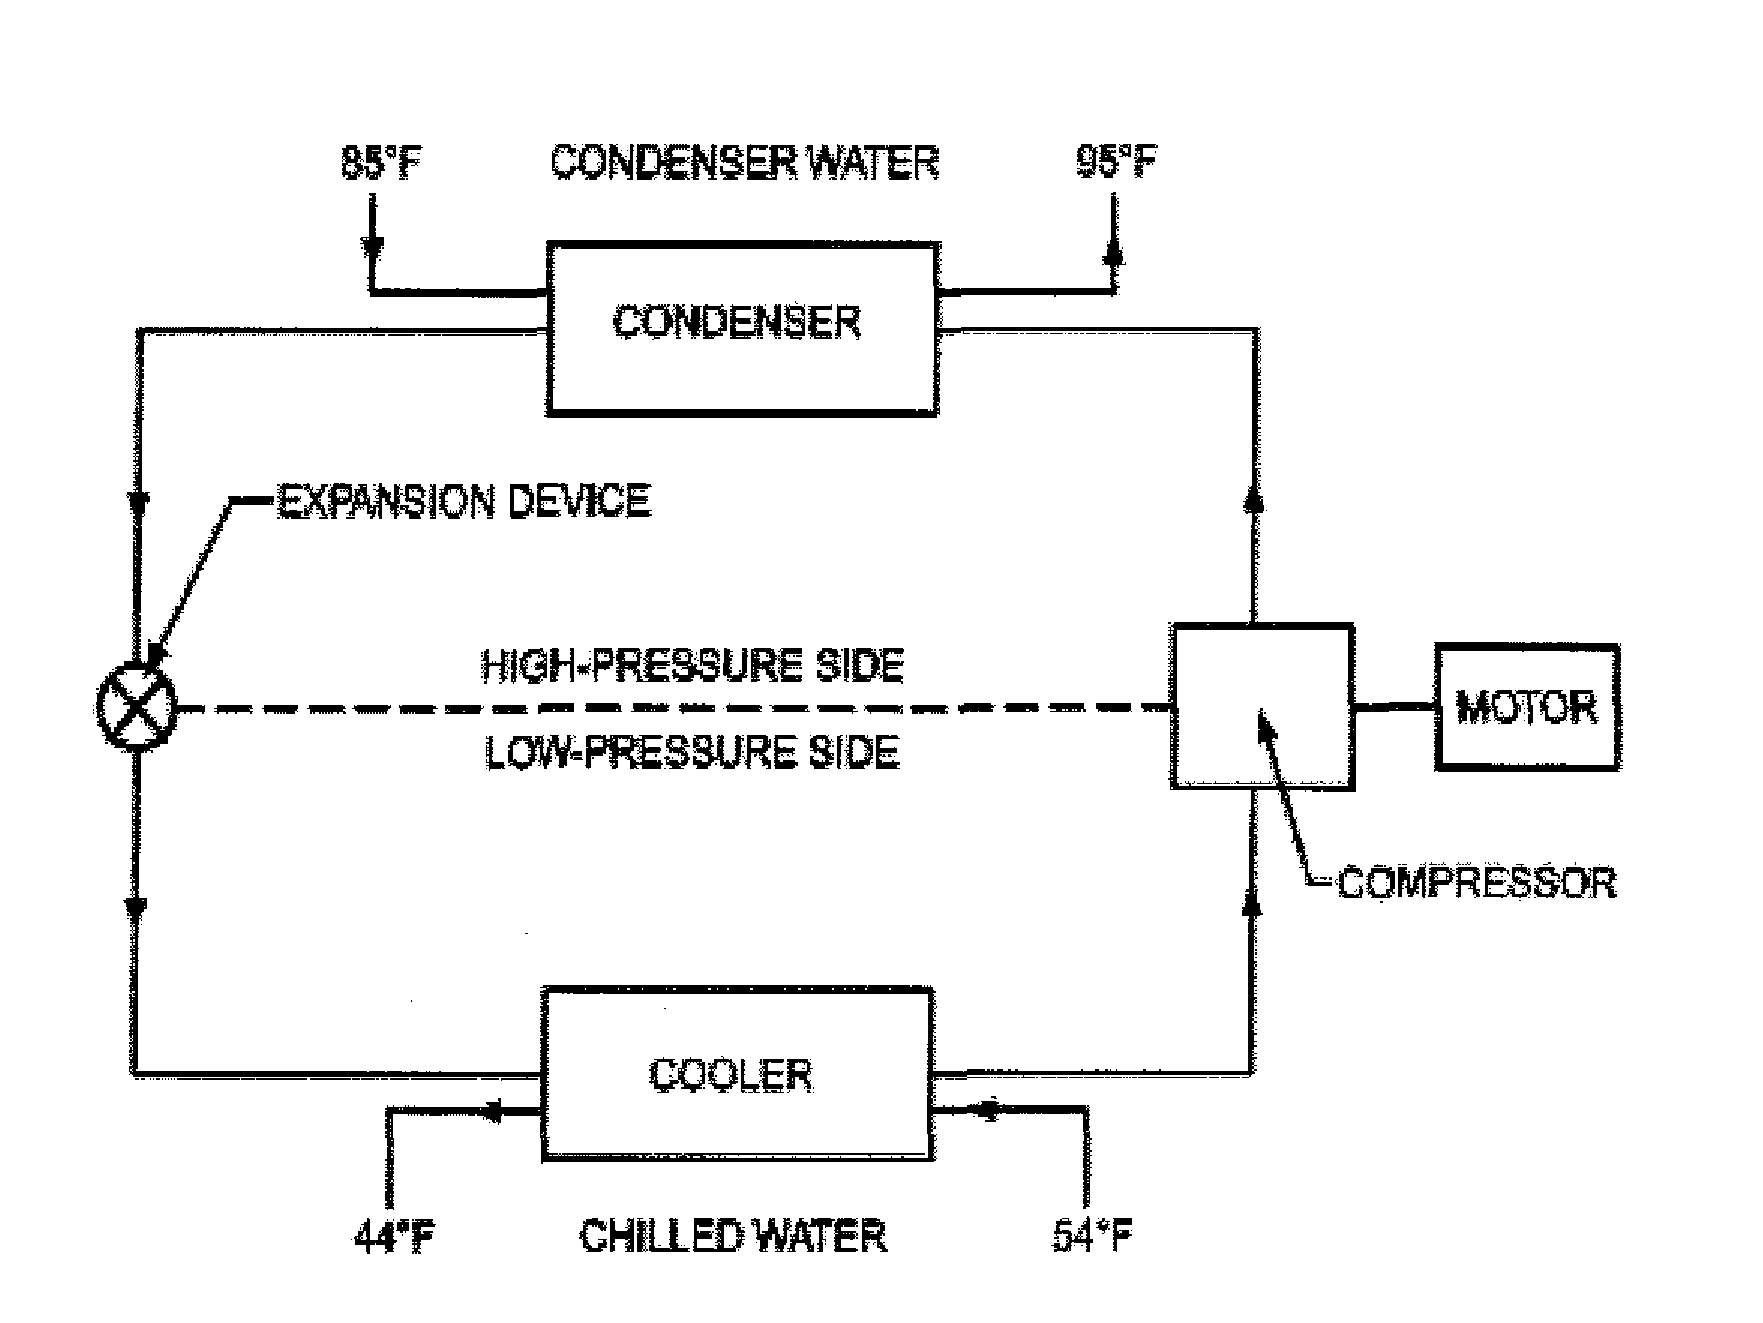 Use of r-1233 in liquid chillers